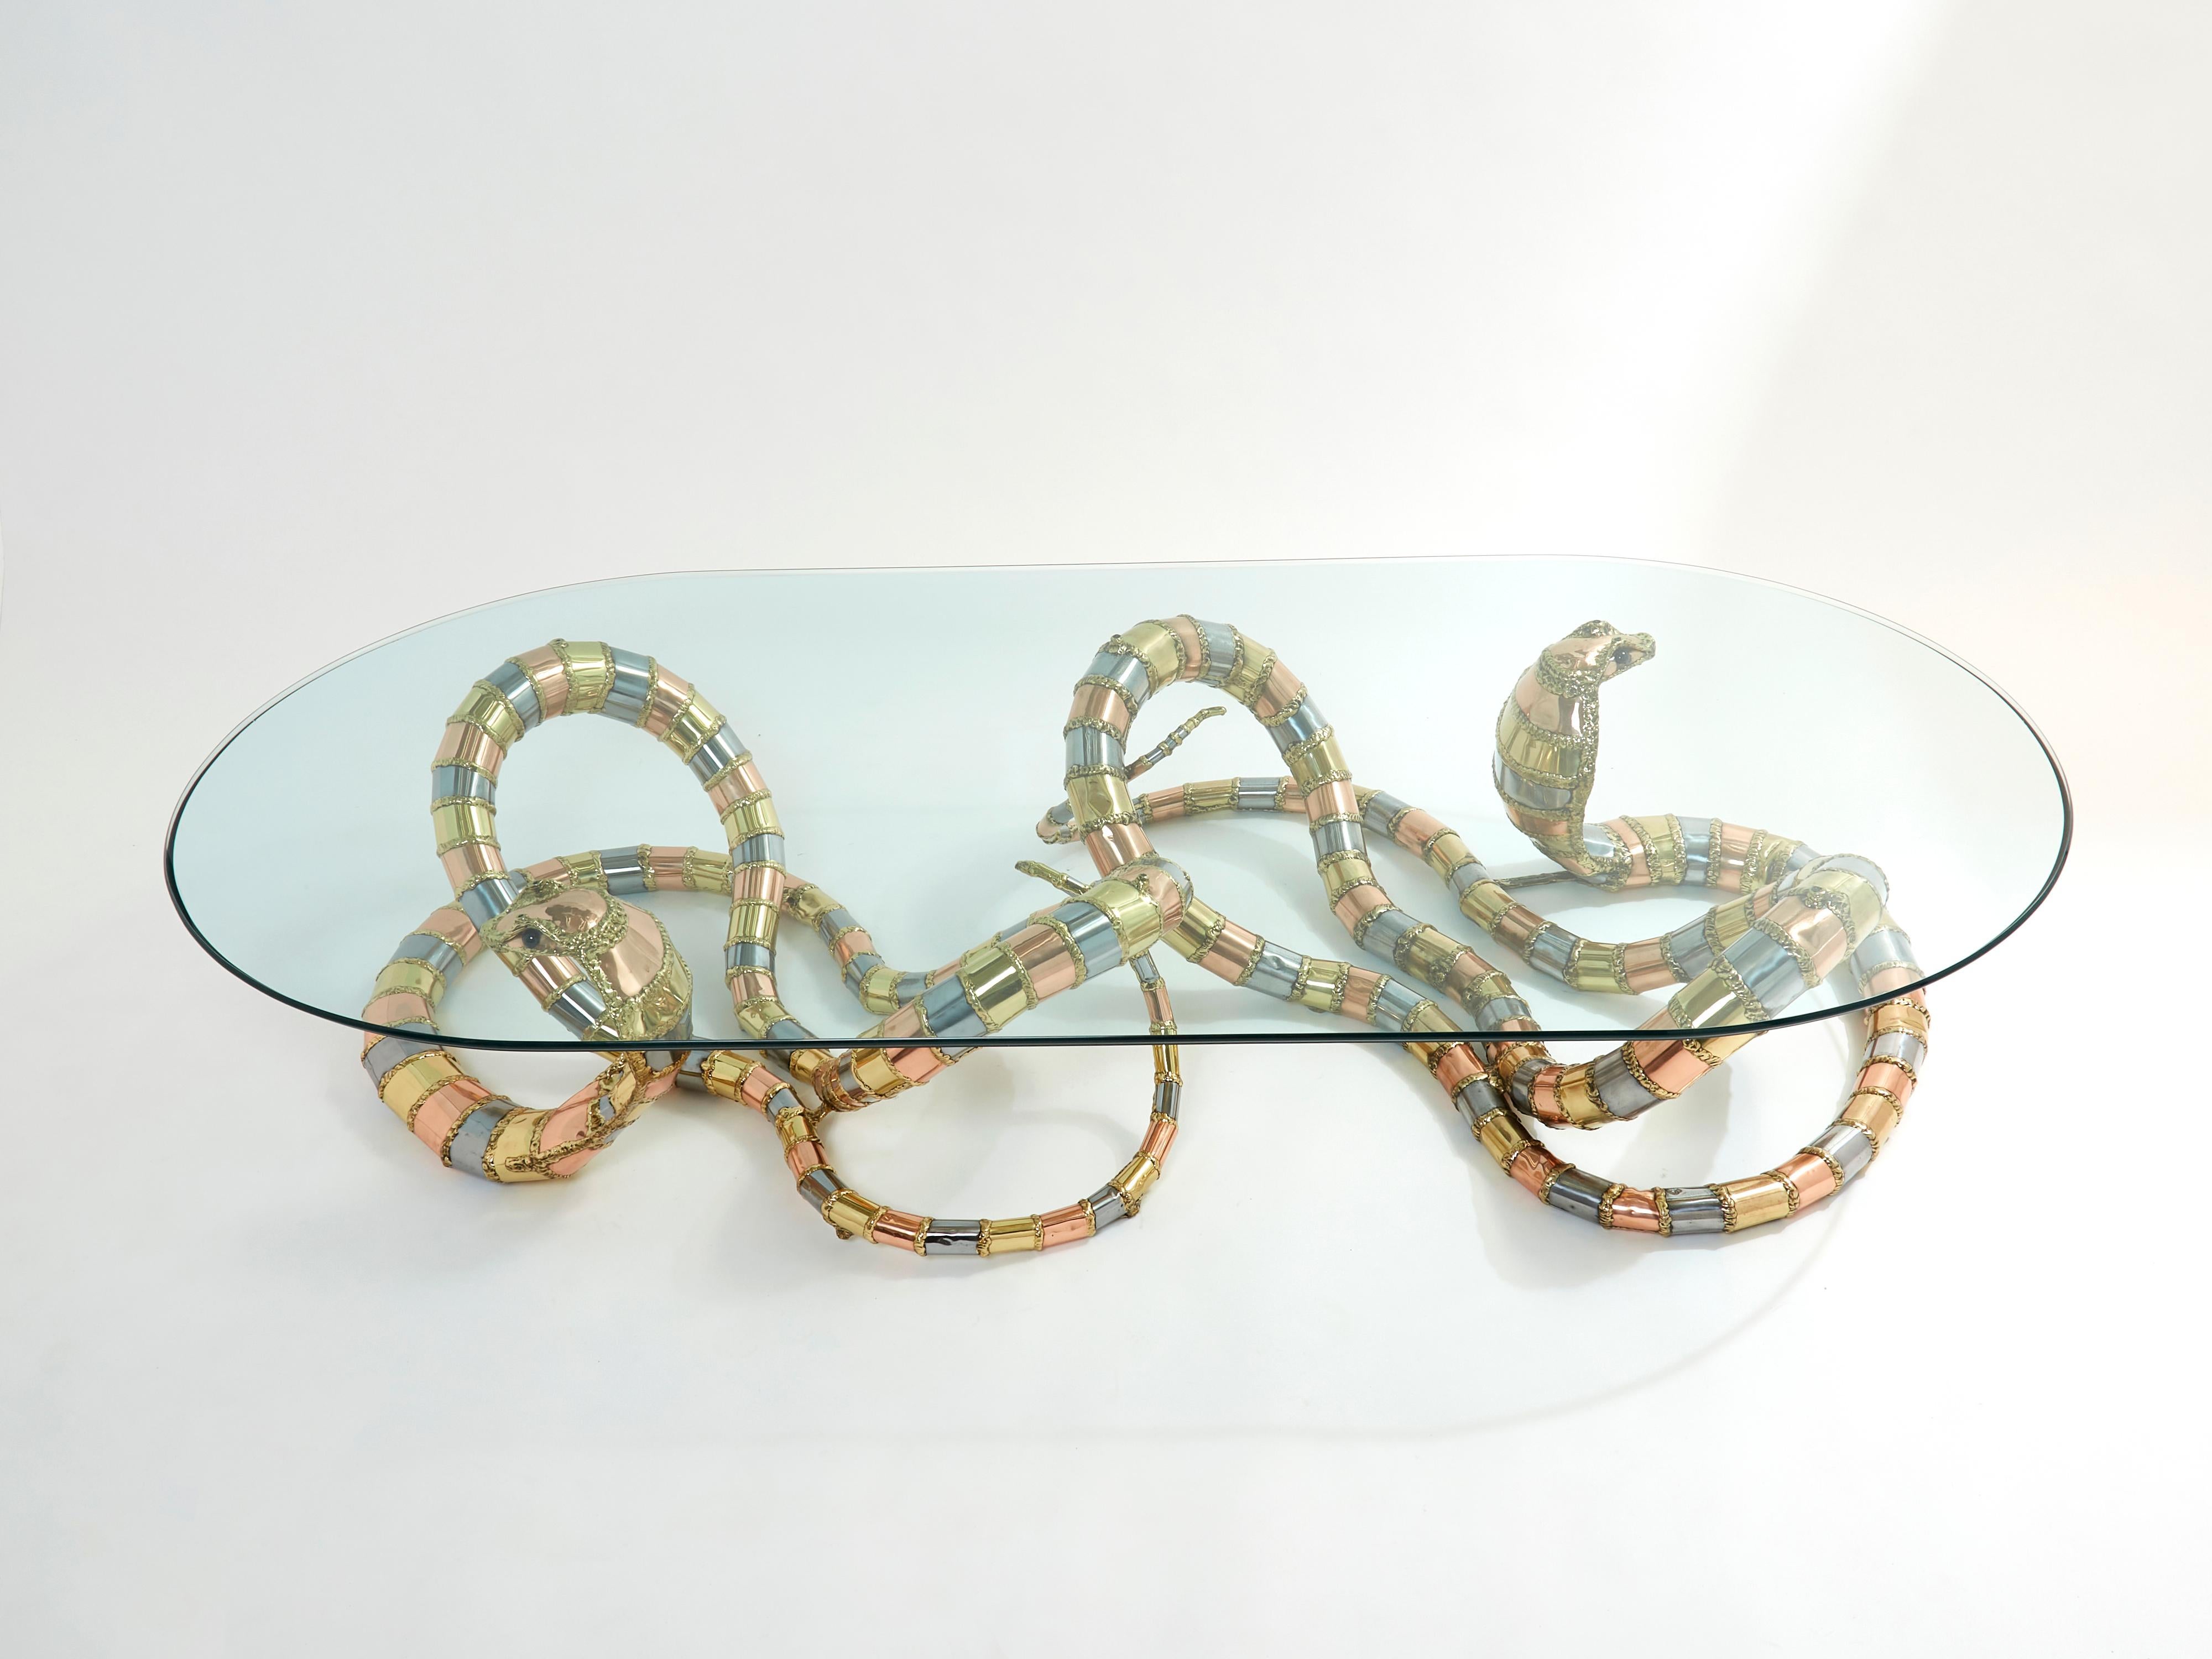 This unique sculpture coffee table signed by Isabelle Masson-Faure for Maison Honoré Paris in the late 1970s will make a fascinating centerpiece for any stylish living room. Formed with two metal sculptures in the lifelike shape of a cobra, this